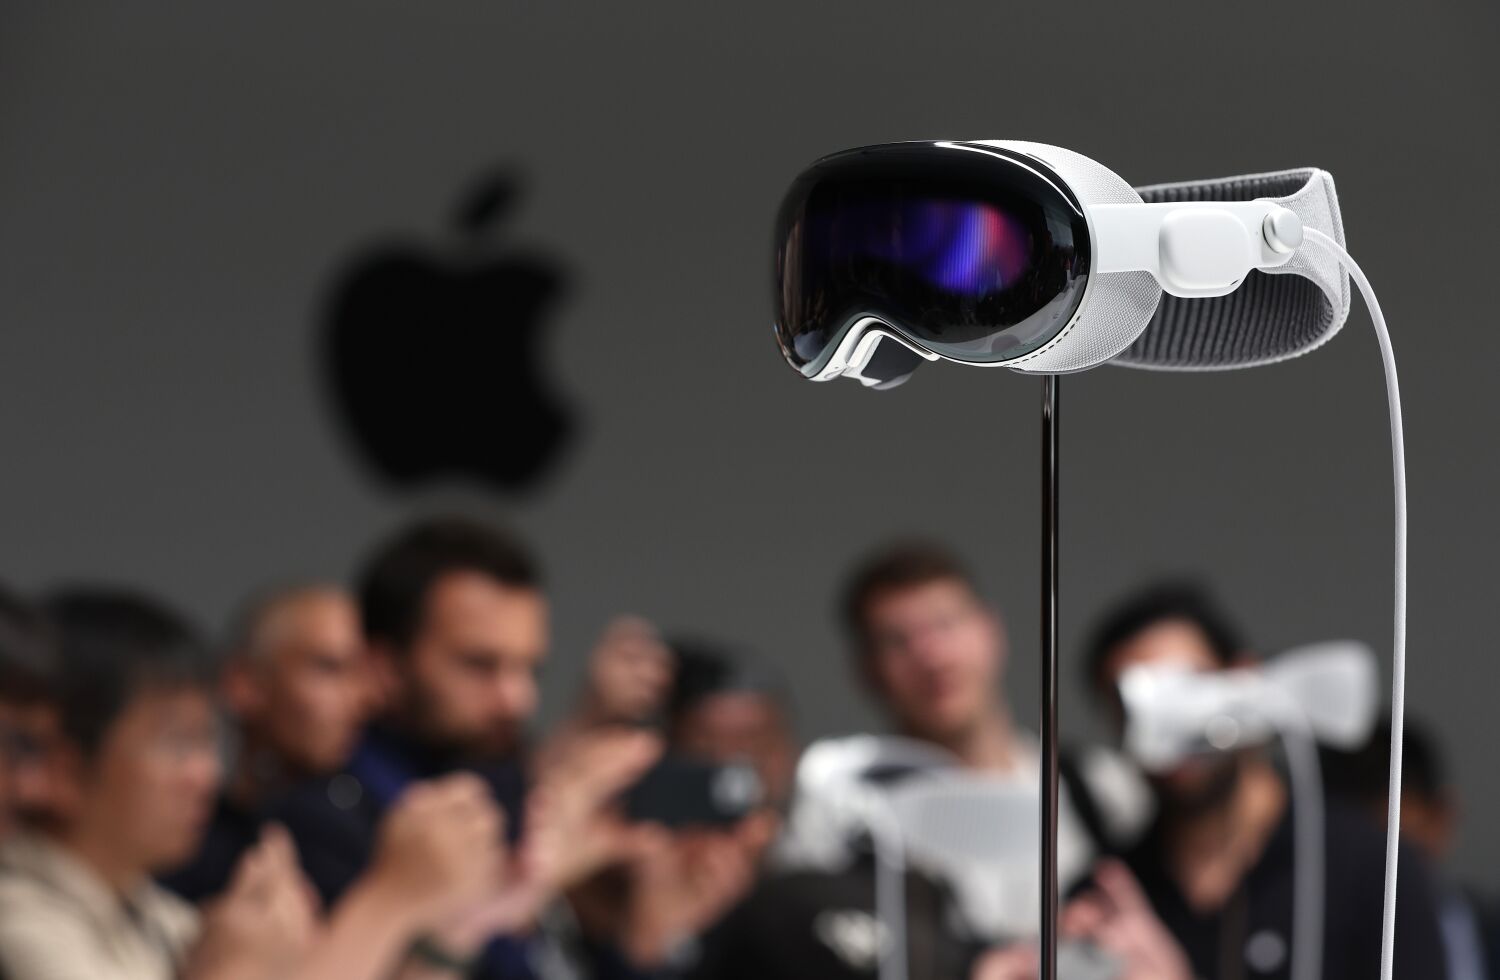 Column: Forget the metaverse. For $3,500, Apple offers a new way to be alone